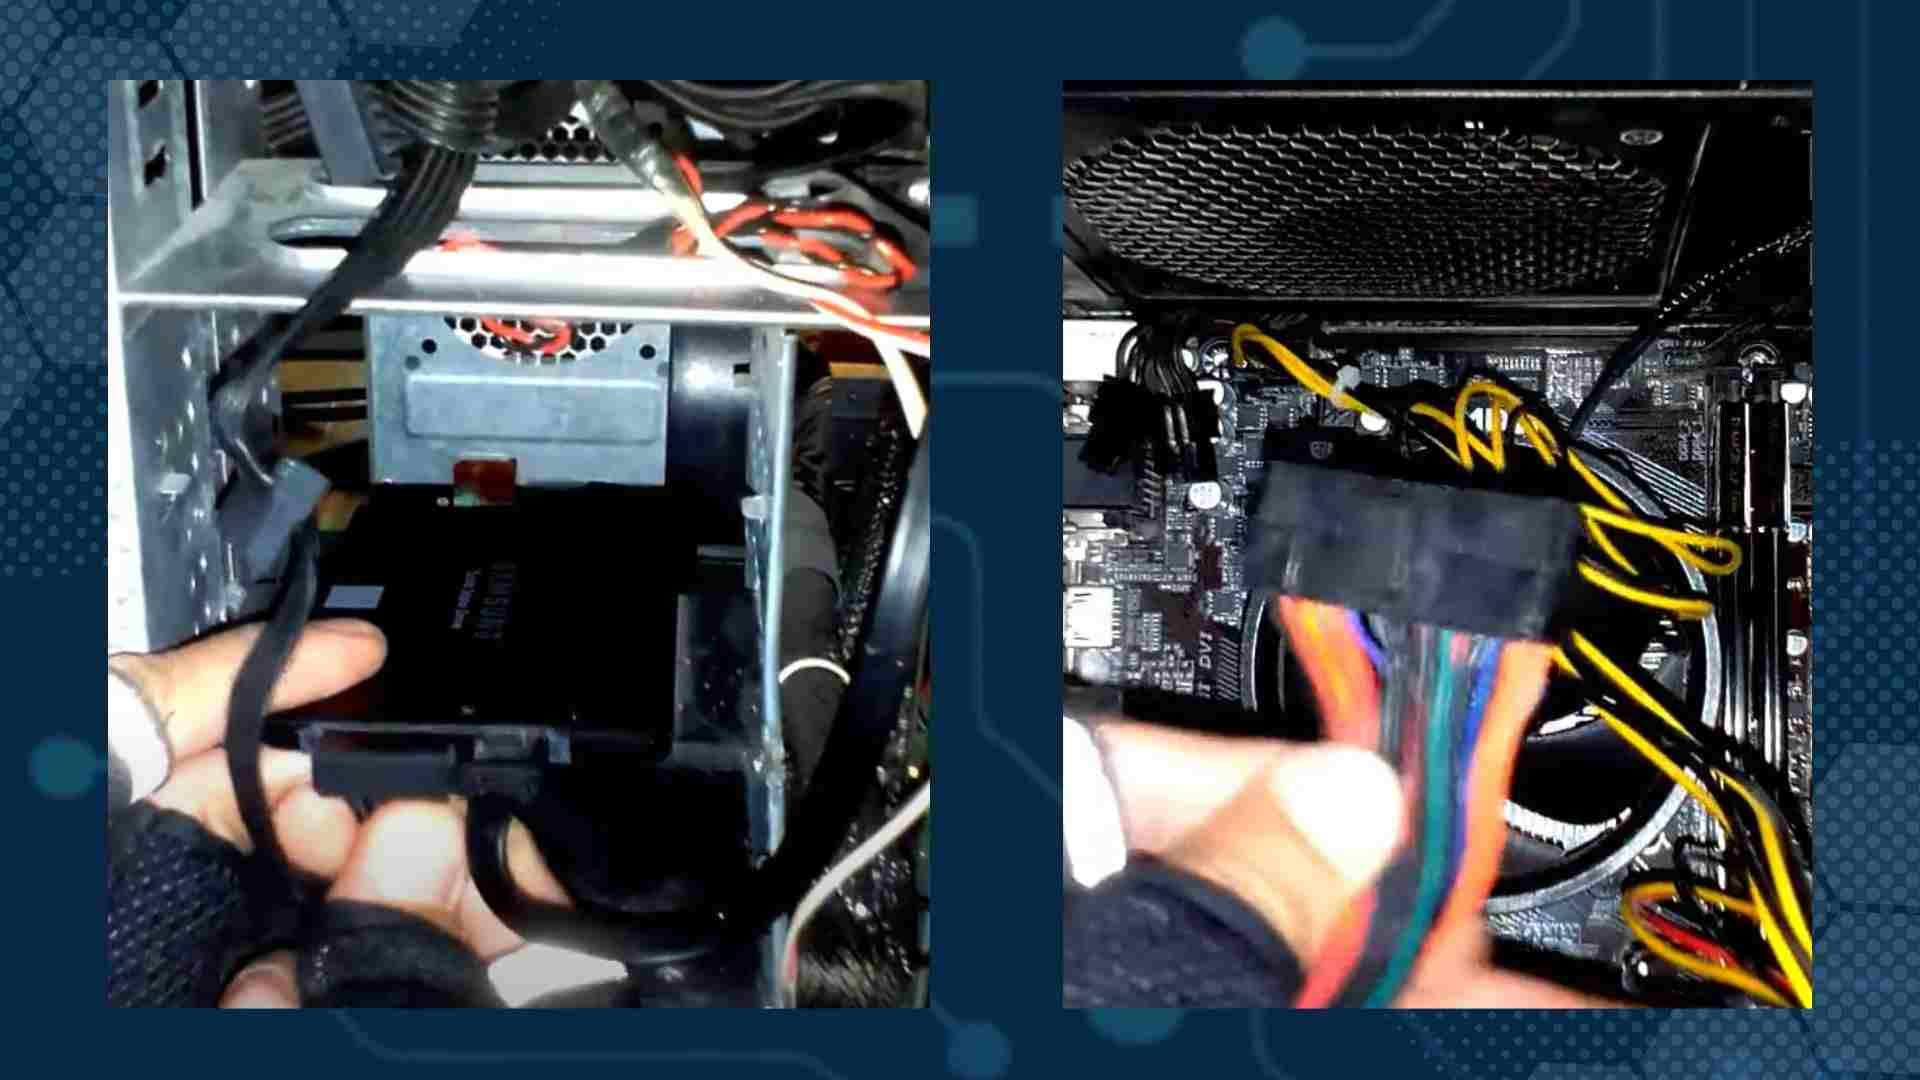 Method # 8: Connect or Replace Extra PSU